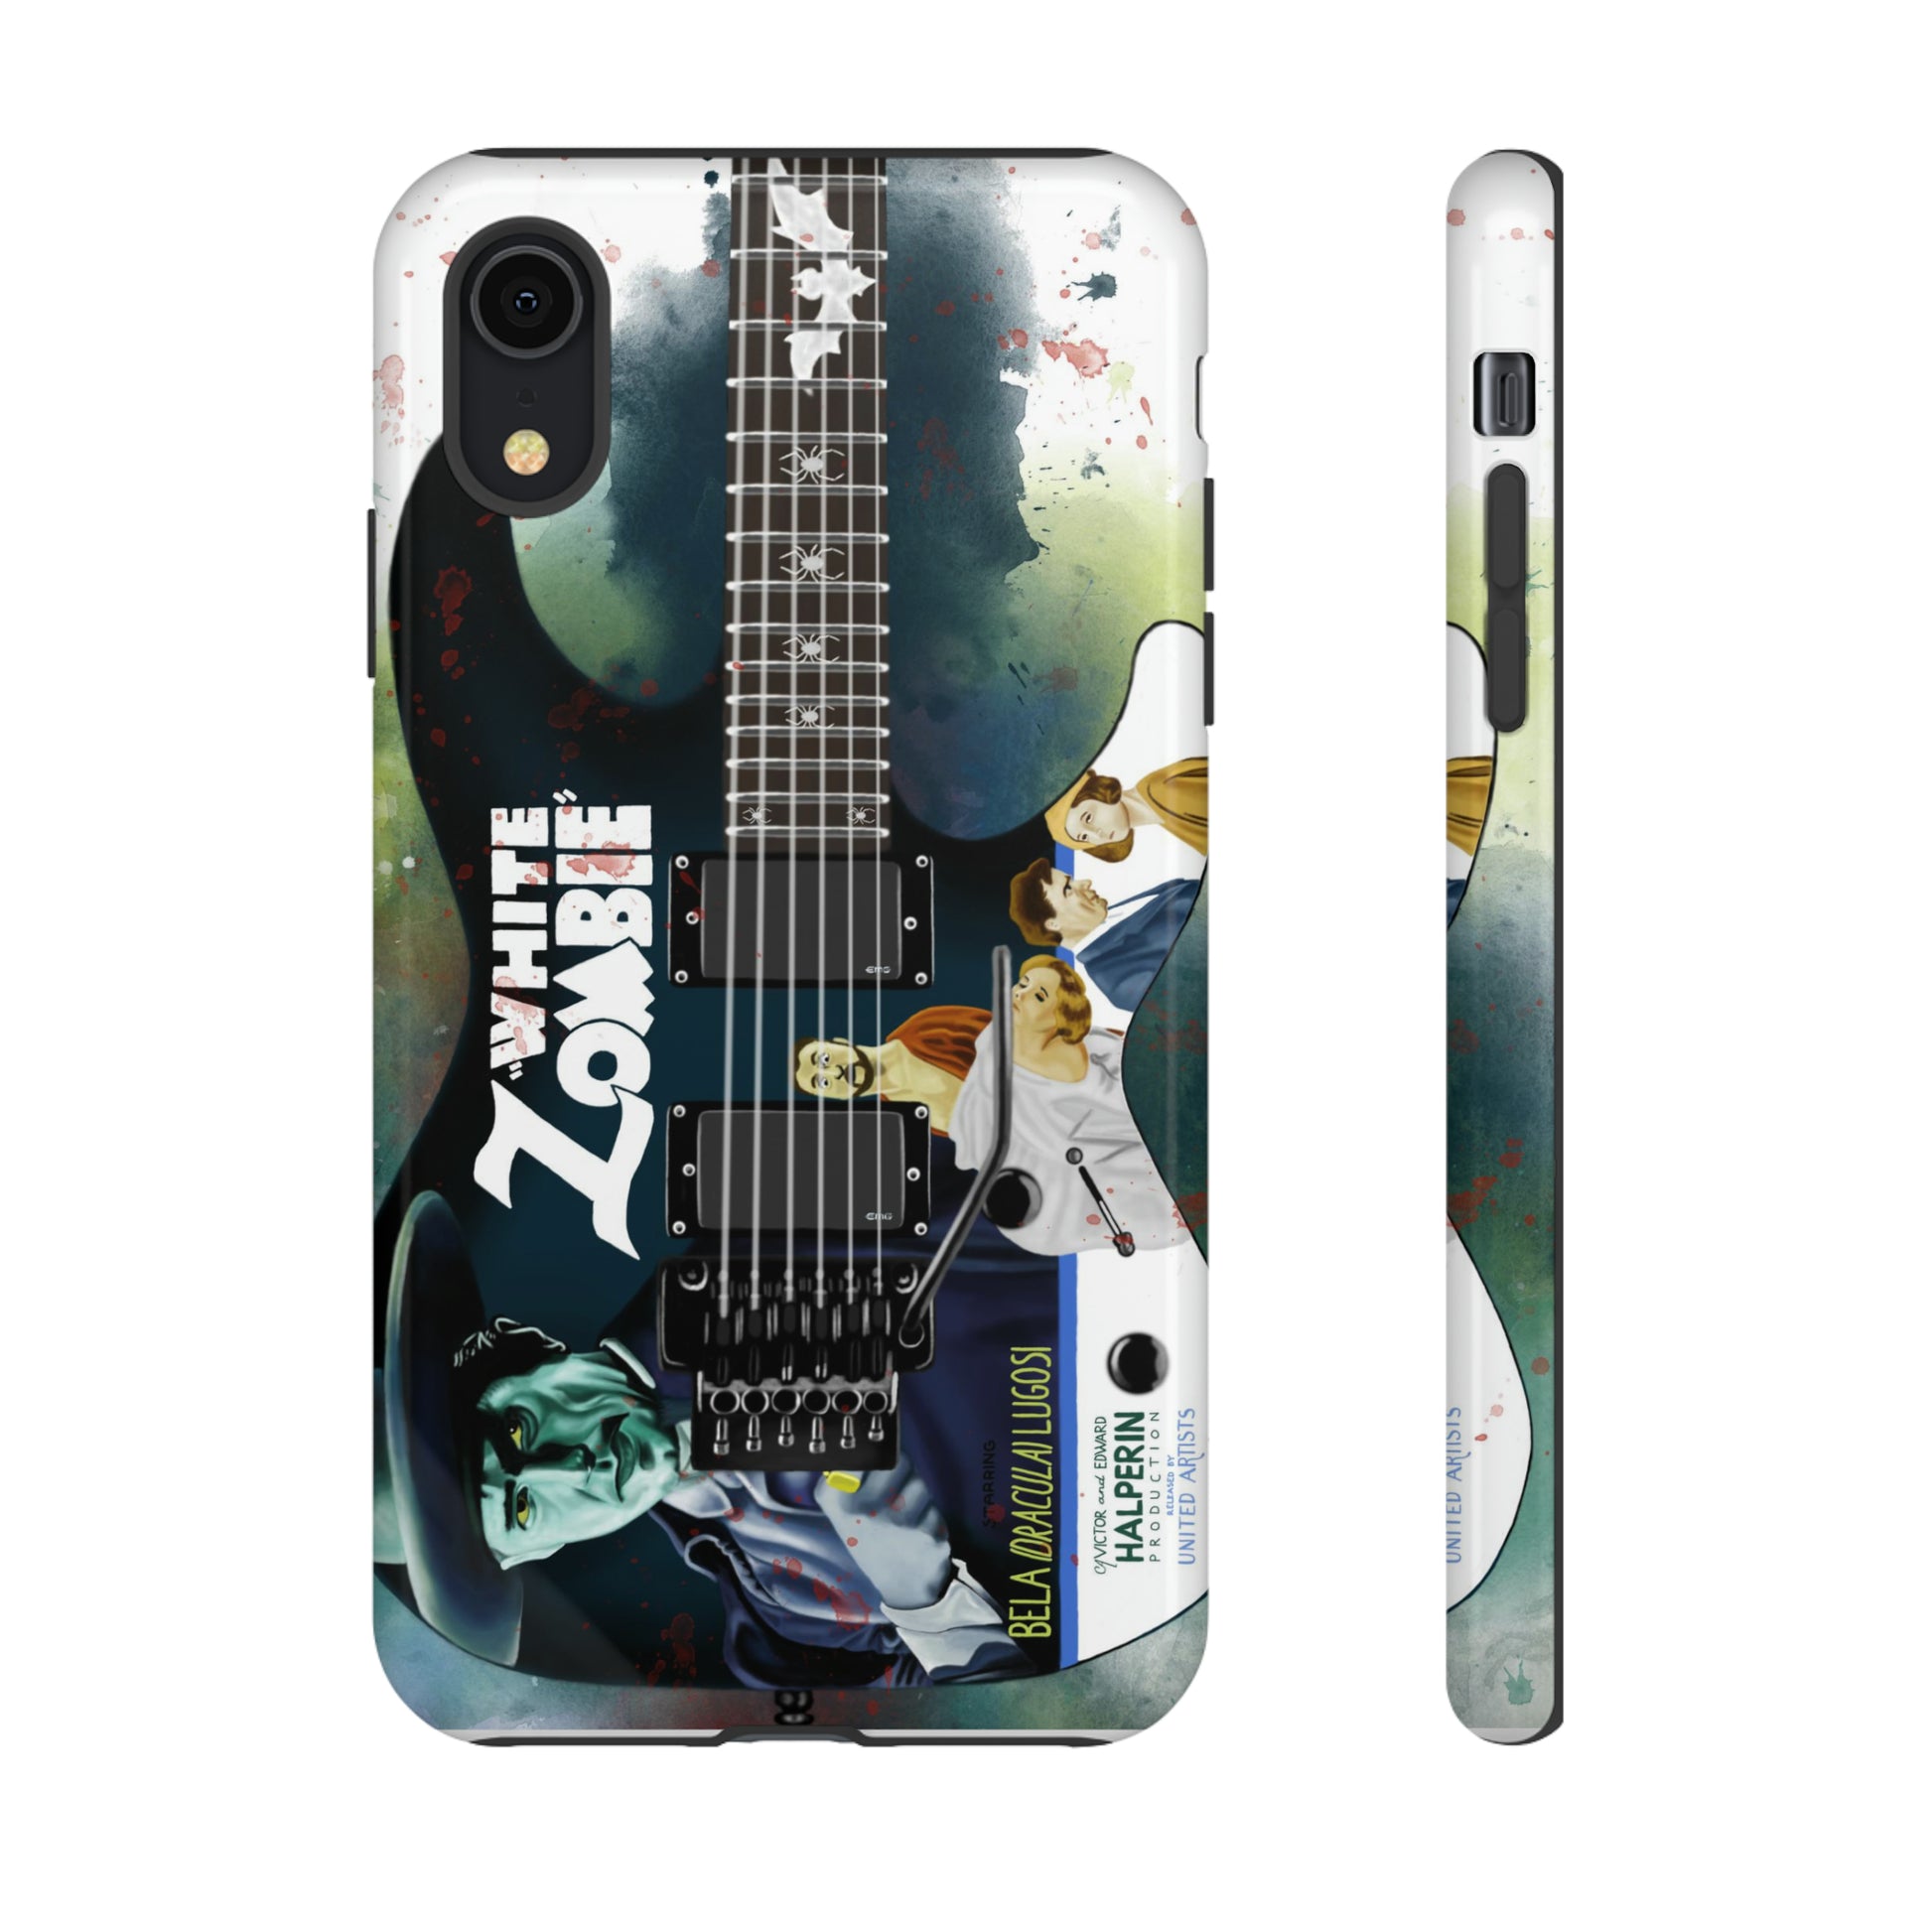 Digital painting of a blue electric guitar with a vintage movie poster on it printed on iphone phone case